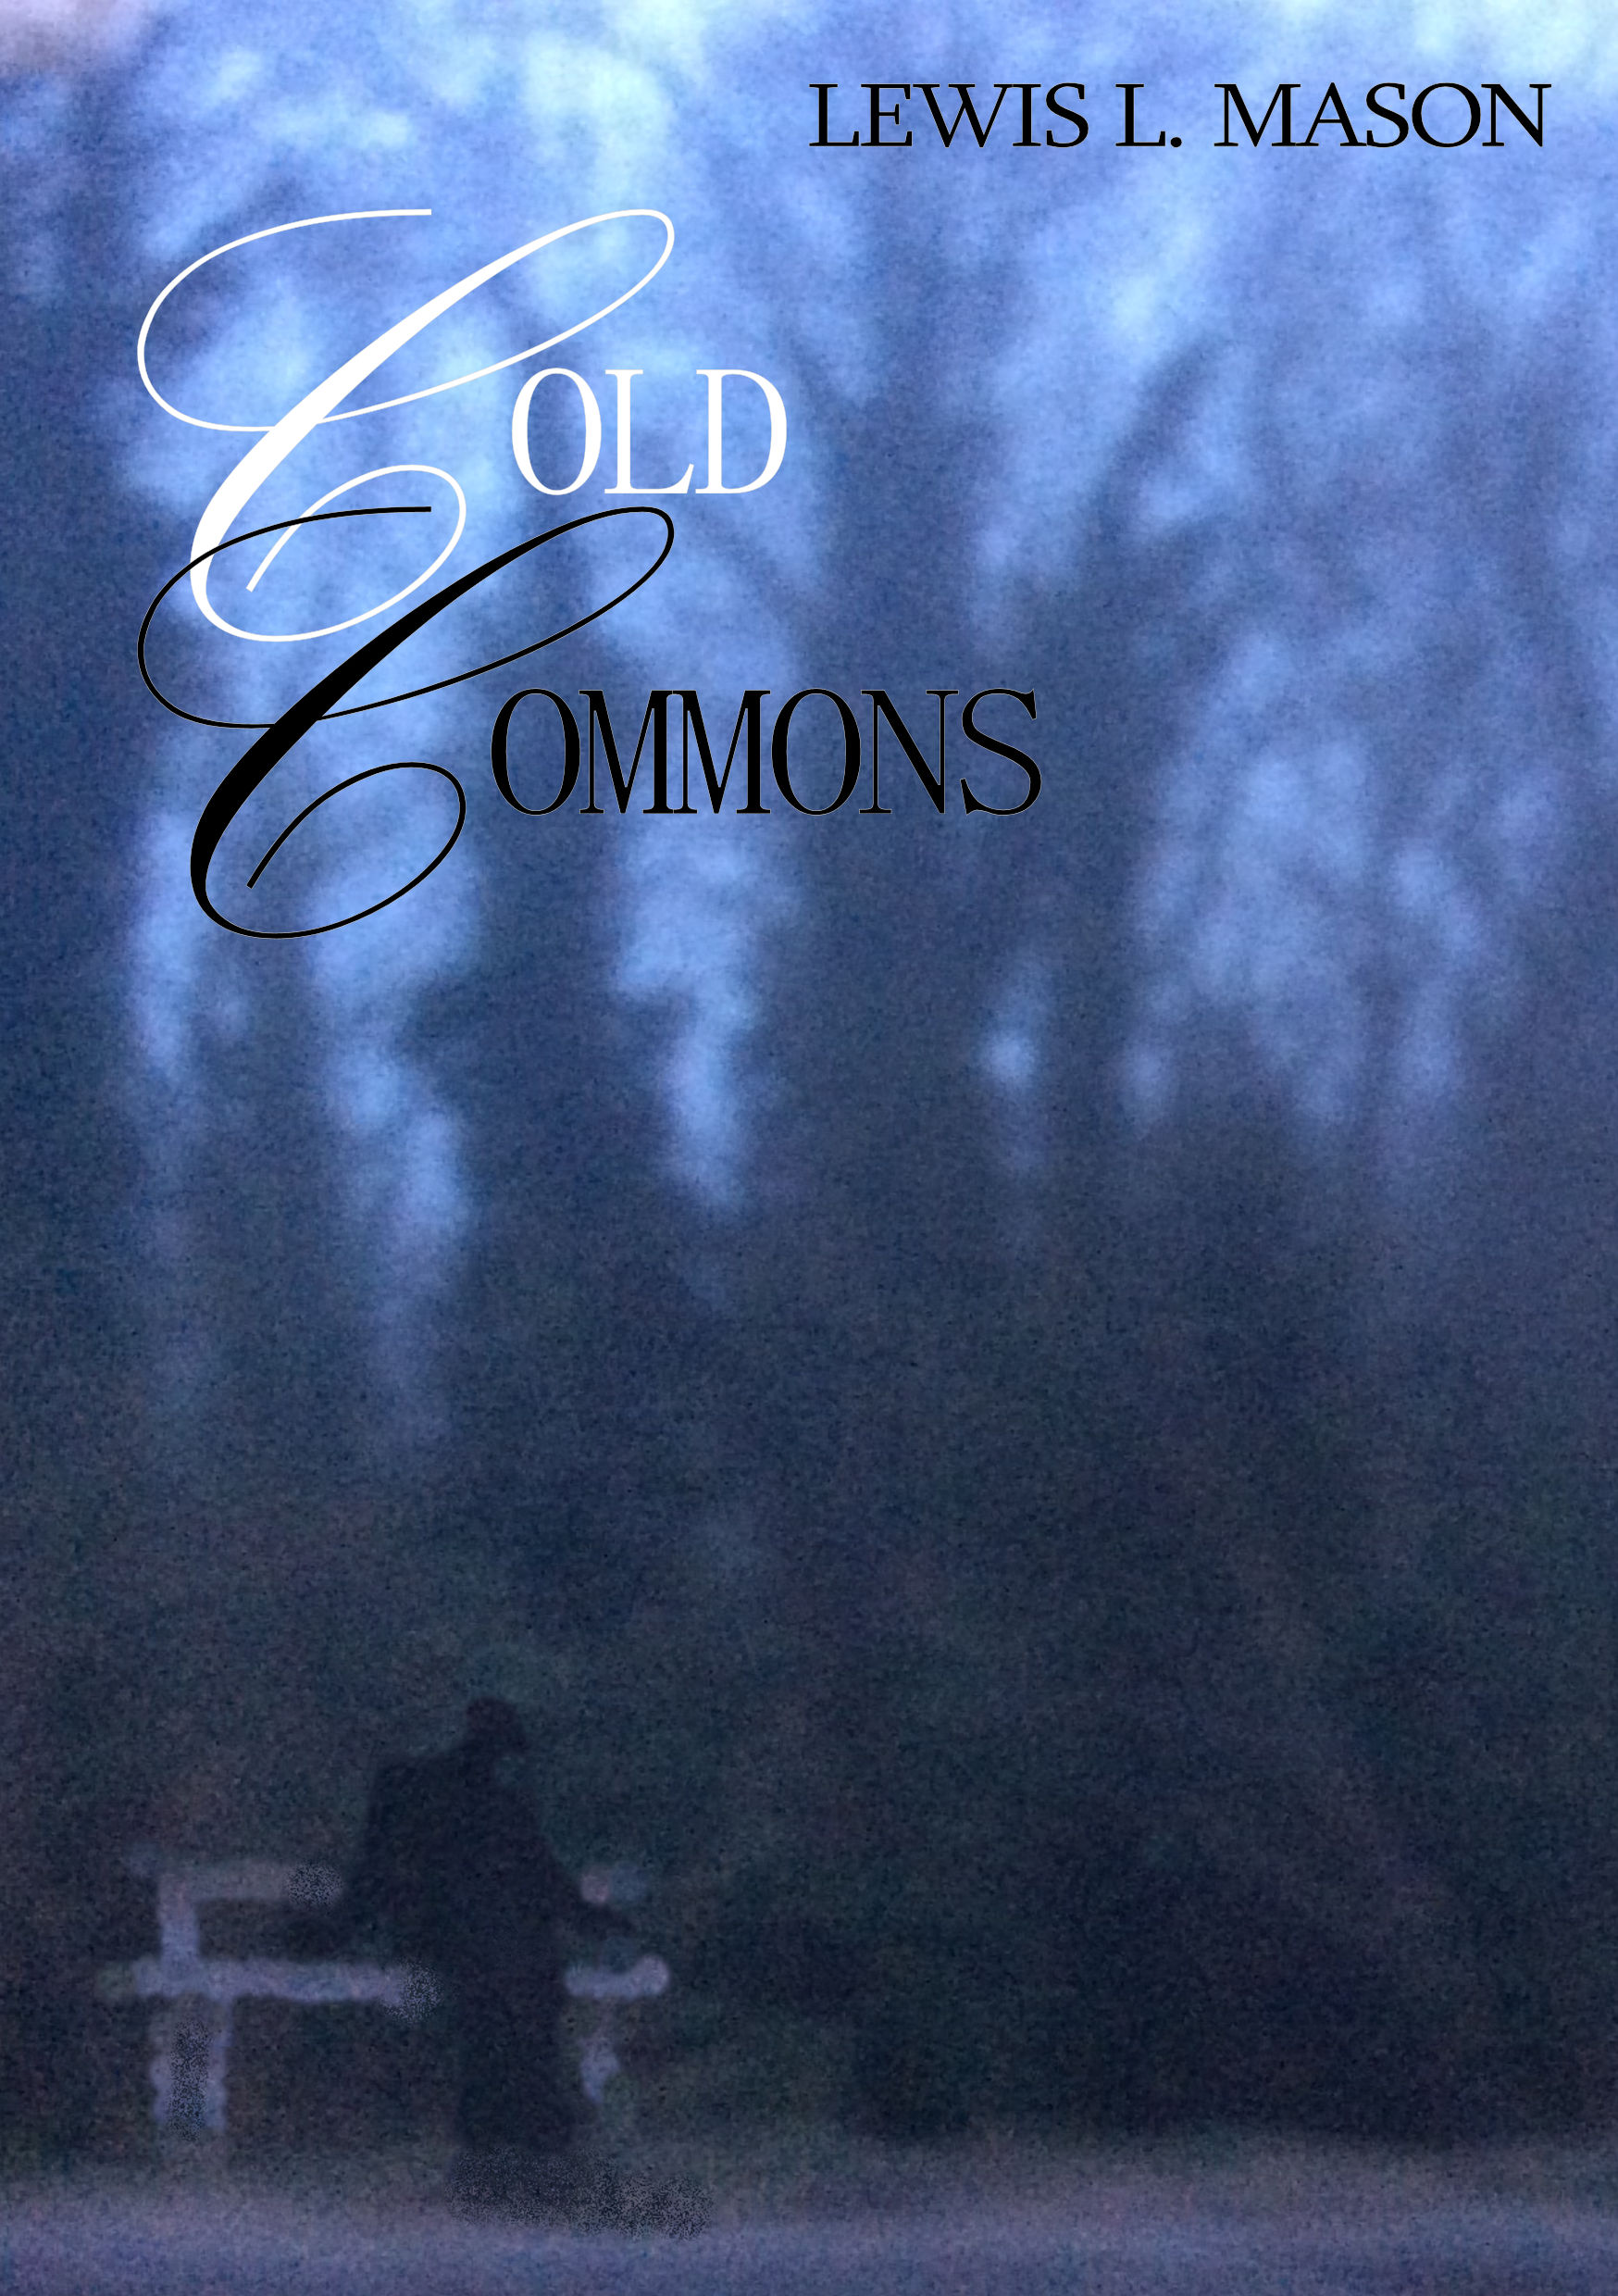 Cold Commons Front Cover